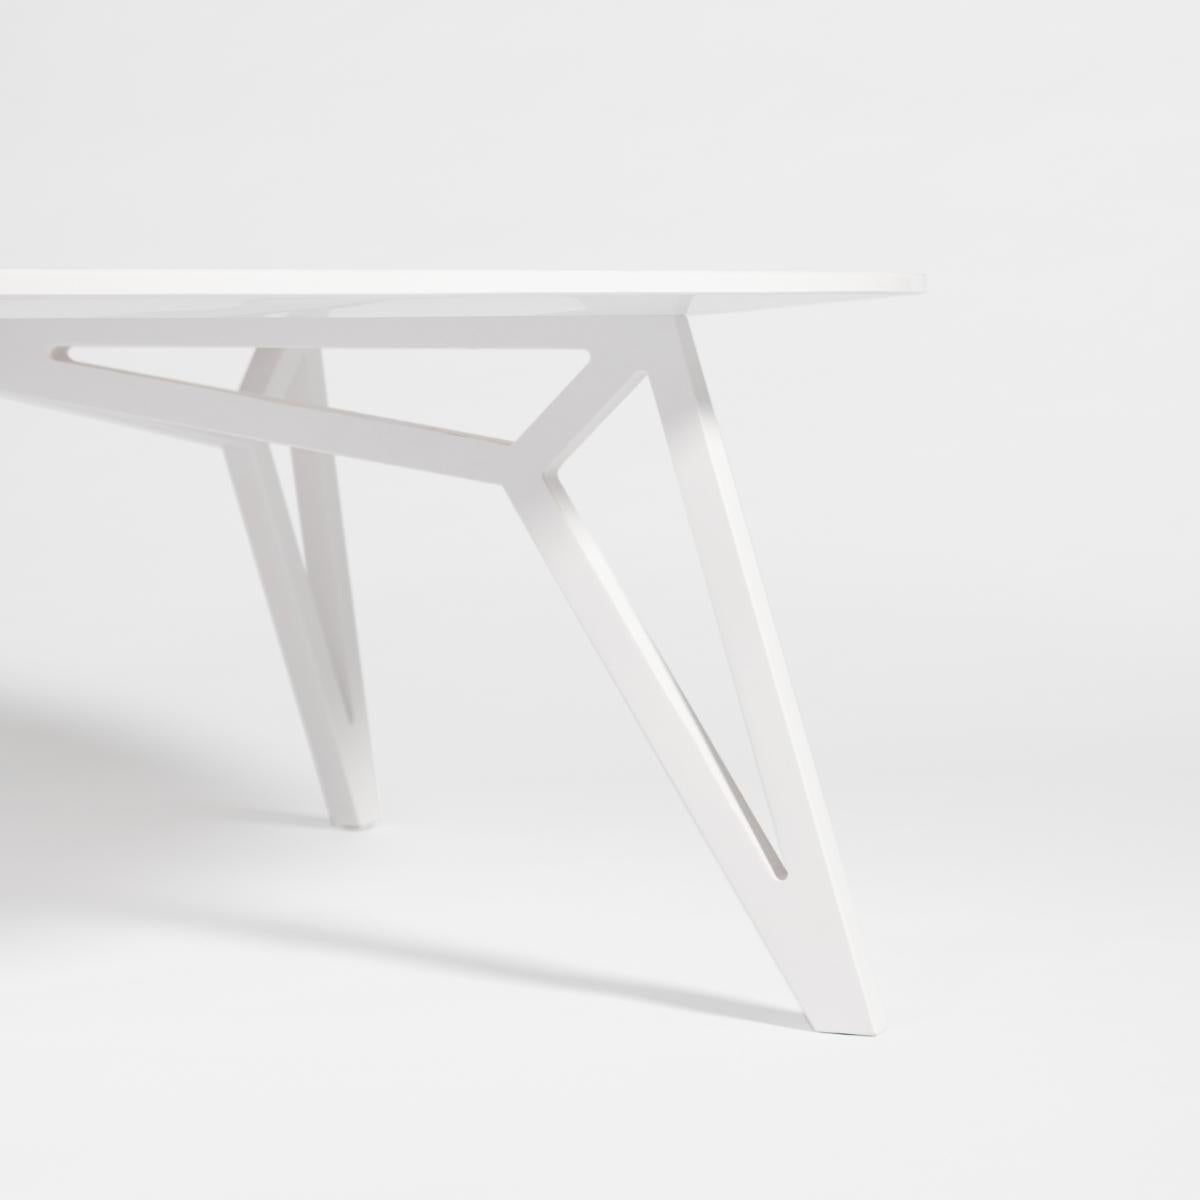 TXT L- 21st century modern quartz stone coffee and side table in white snow

The TXT coffee table is an object that reflects the main concepts of the brand, by texturizing the surface with an exclusive pattern derived from the conceptual